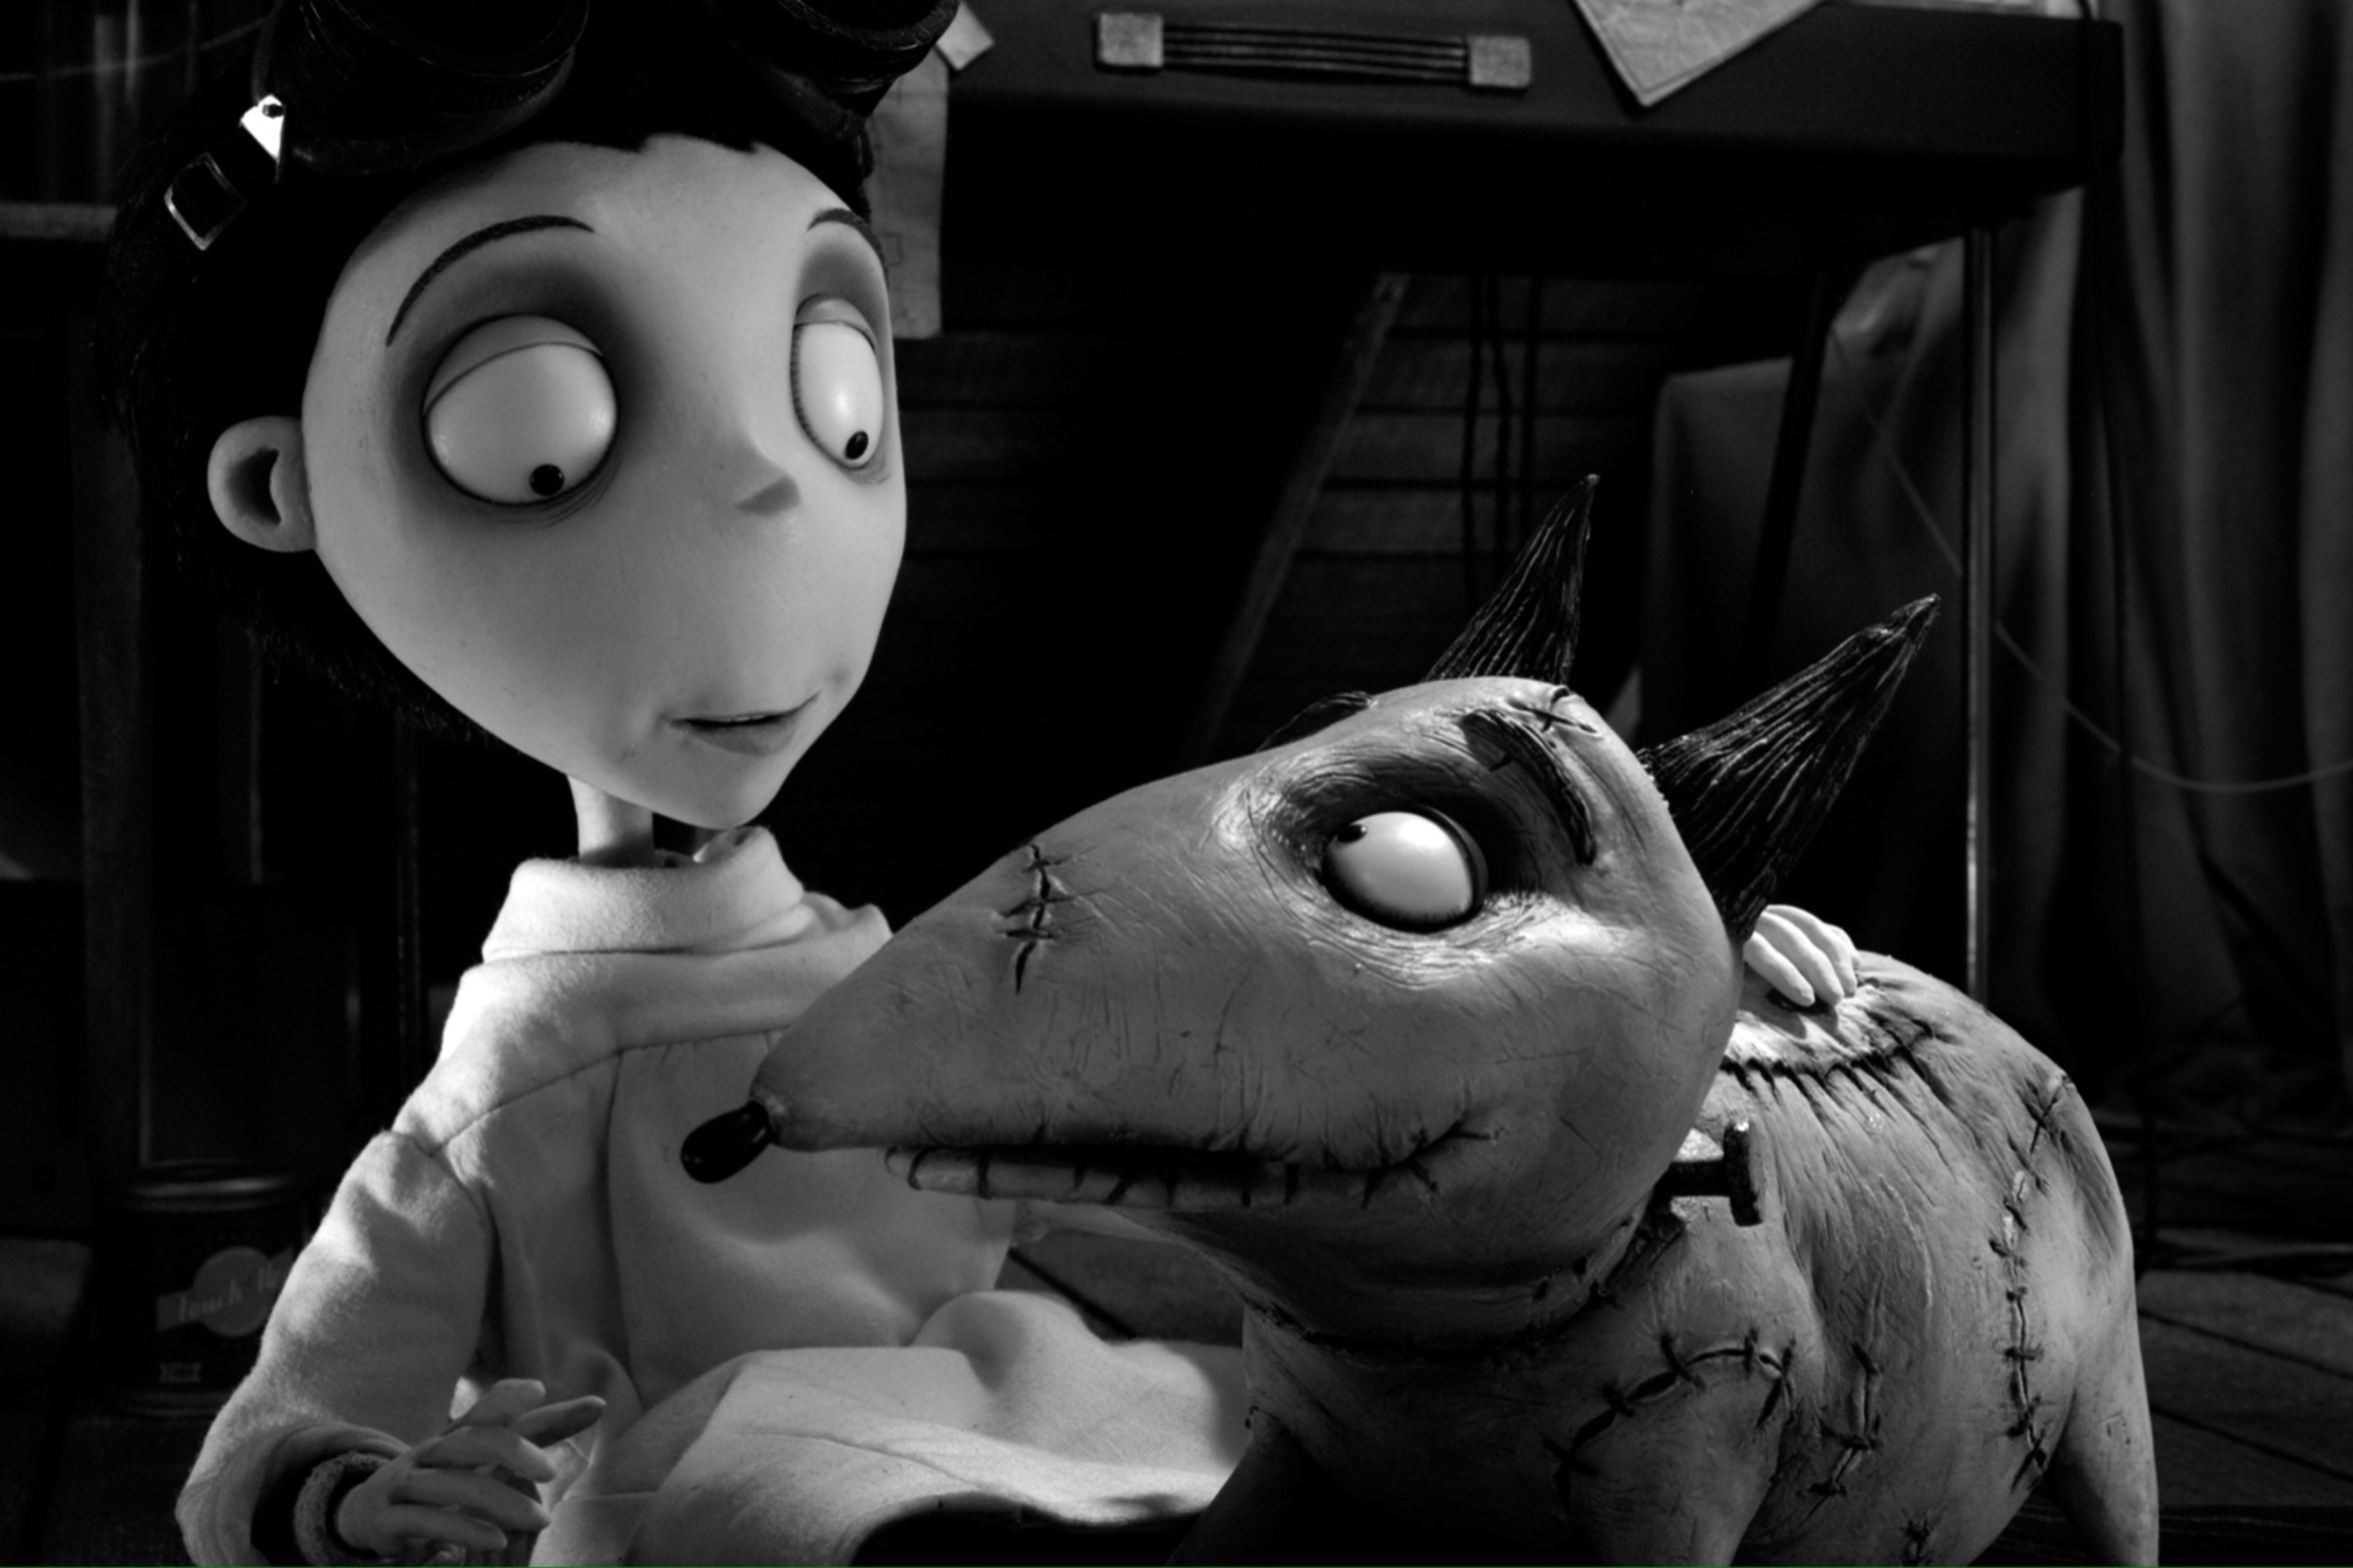 <p>Inspired by Mary Shelley’s <em>Frankenstein</em>, <em>Frankenweenie</em> sees Tim Burton adapt his live-action short into a stop-motion animated feature. When young Victor Frankenstein’s beloved dog Sparky dies, he uses science to bring it back to life, causing chaos among his neighbors. Presented in black and white, Burton offers a fresh take on the classic monstery story that is both funny and heartfelt. The pairing of Burton and the <em>Frankenstein</em> story is just as good as it sounds on paper.</p><p><a href='https://www.msn.com/en-us/community/channel/vid-cj9pqbr0vn9in2b6ddcd8sfgpfq6x6utp44fssrv6mc2gtybw0us'>Follow us on MSN to see more of our exclusive entertainment content.</a></p>